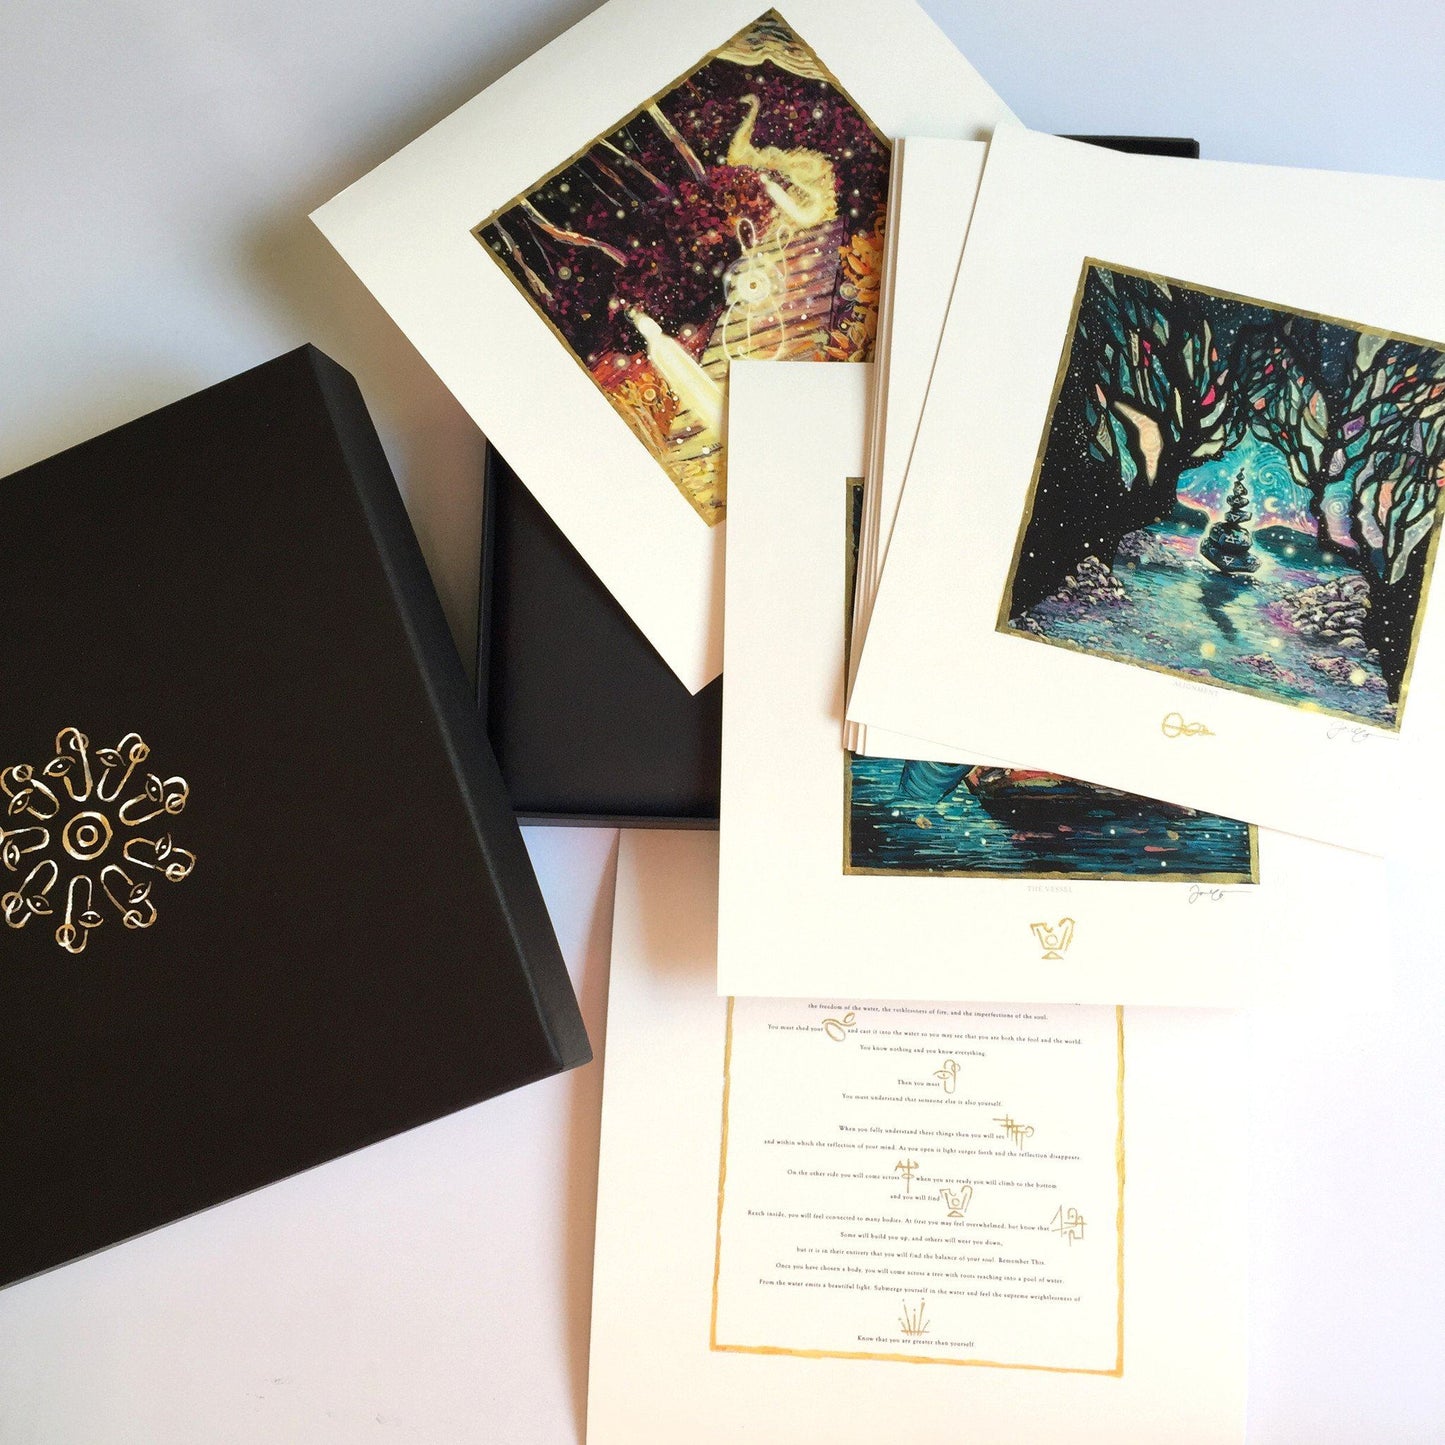 Gold Enlightenment Box Set (Limited Edition of 12) James R. Eads